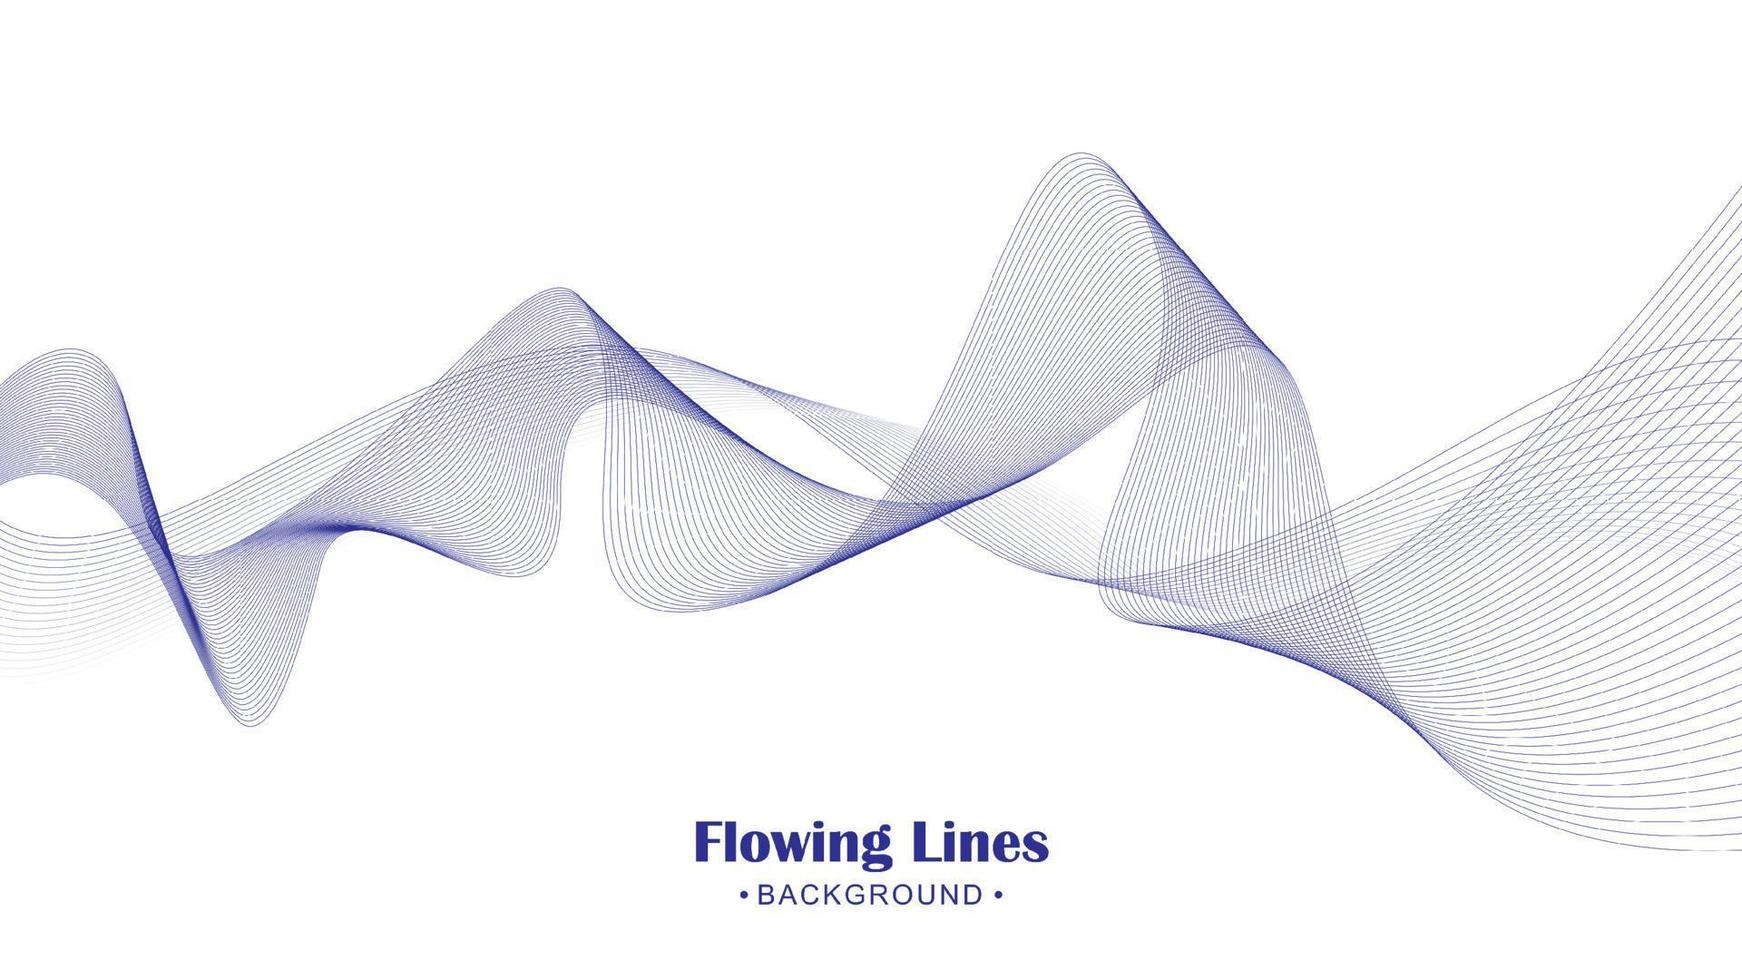 Flowing line style background design vector